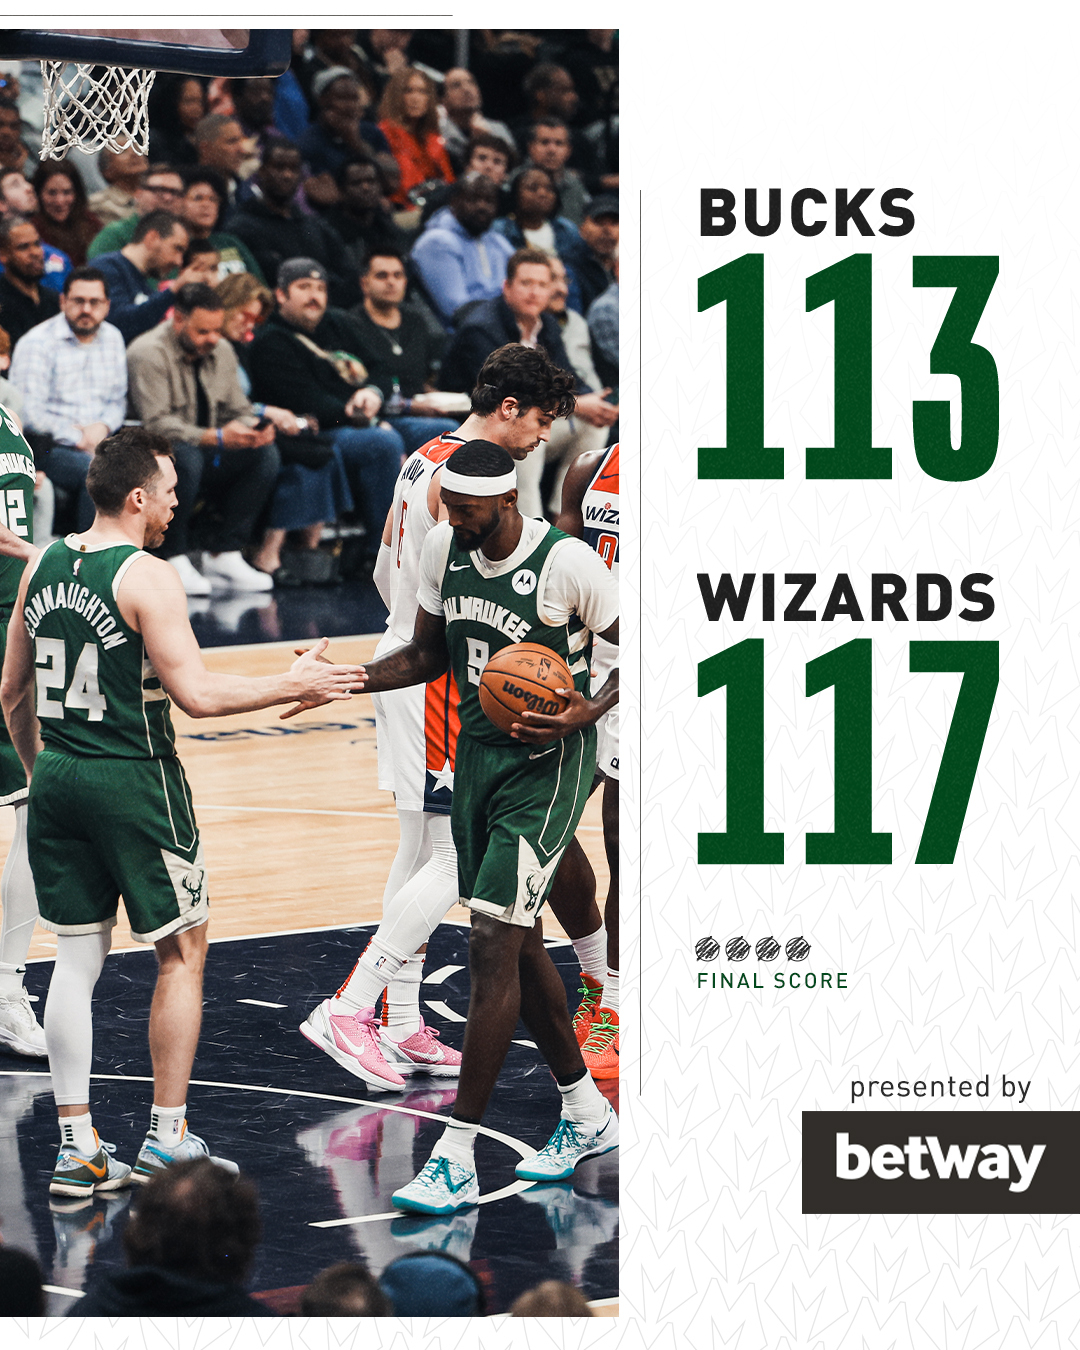 May be an image of 2 people, people playing basketball, crowd and text that says "2 QMAIGHTOW 24 BUCKS 113 WiZ WIZARDS 117 DOIV FINAL SCORE presented by betway"